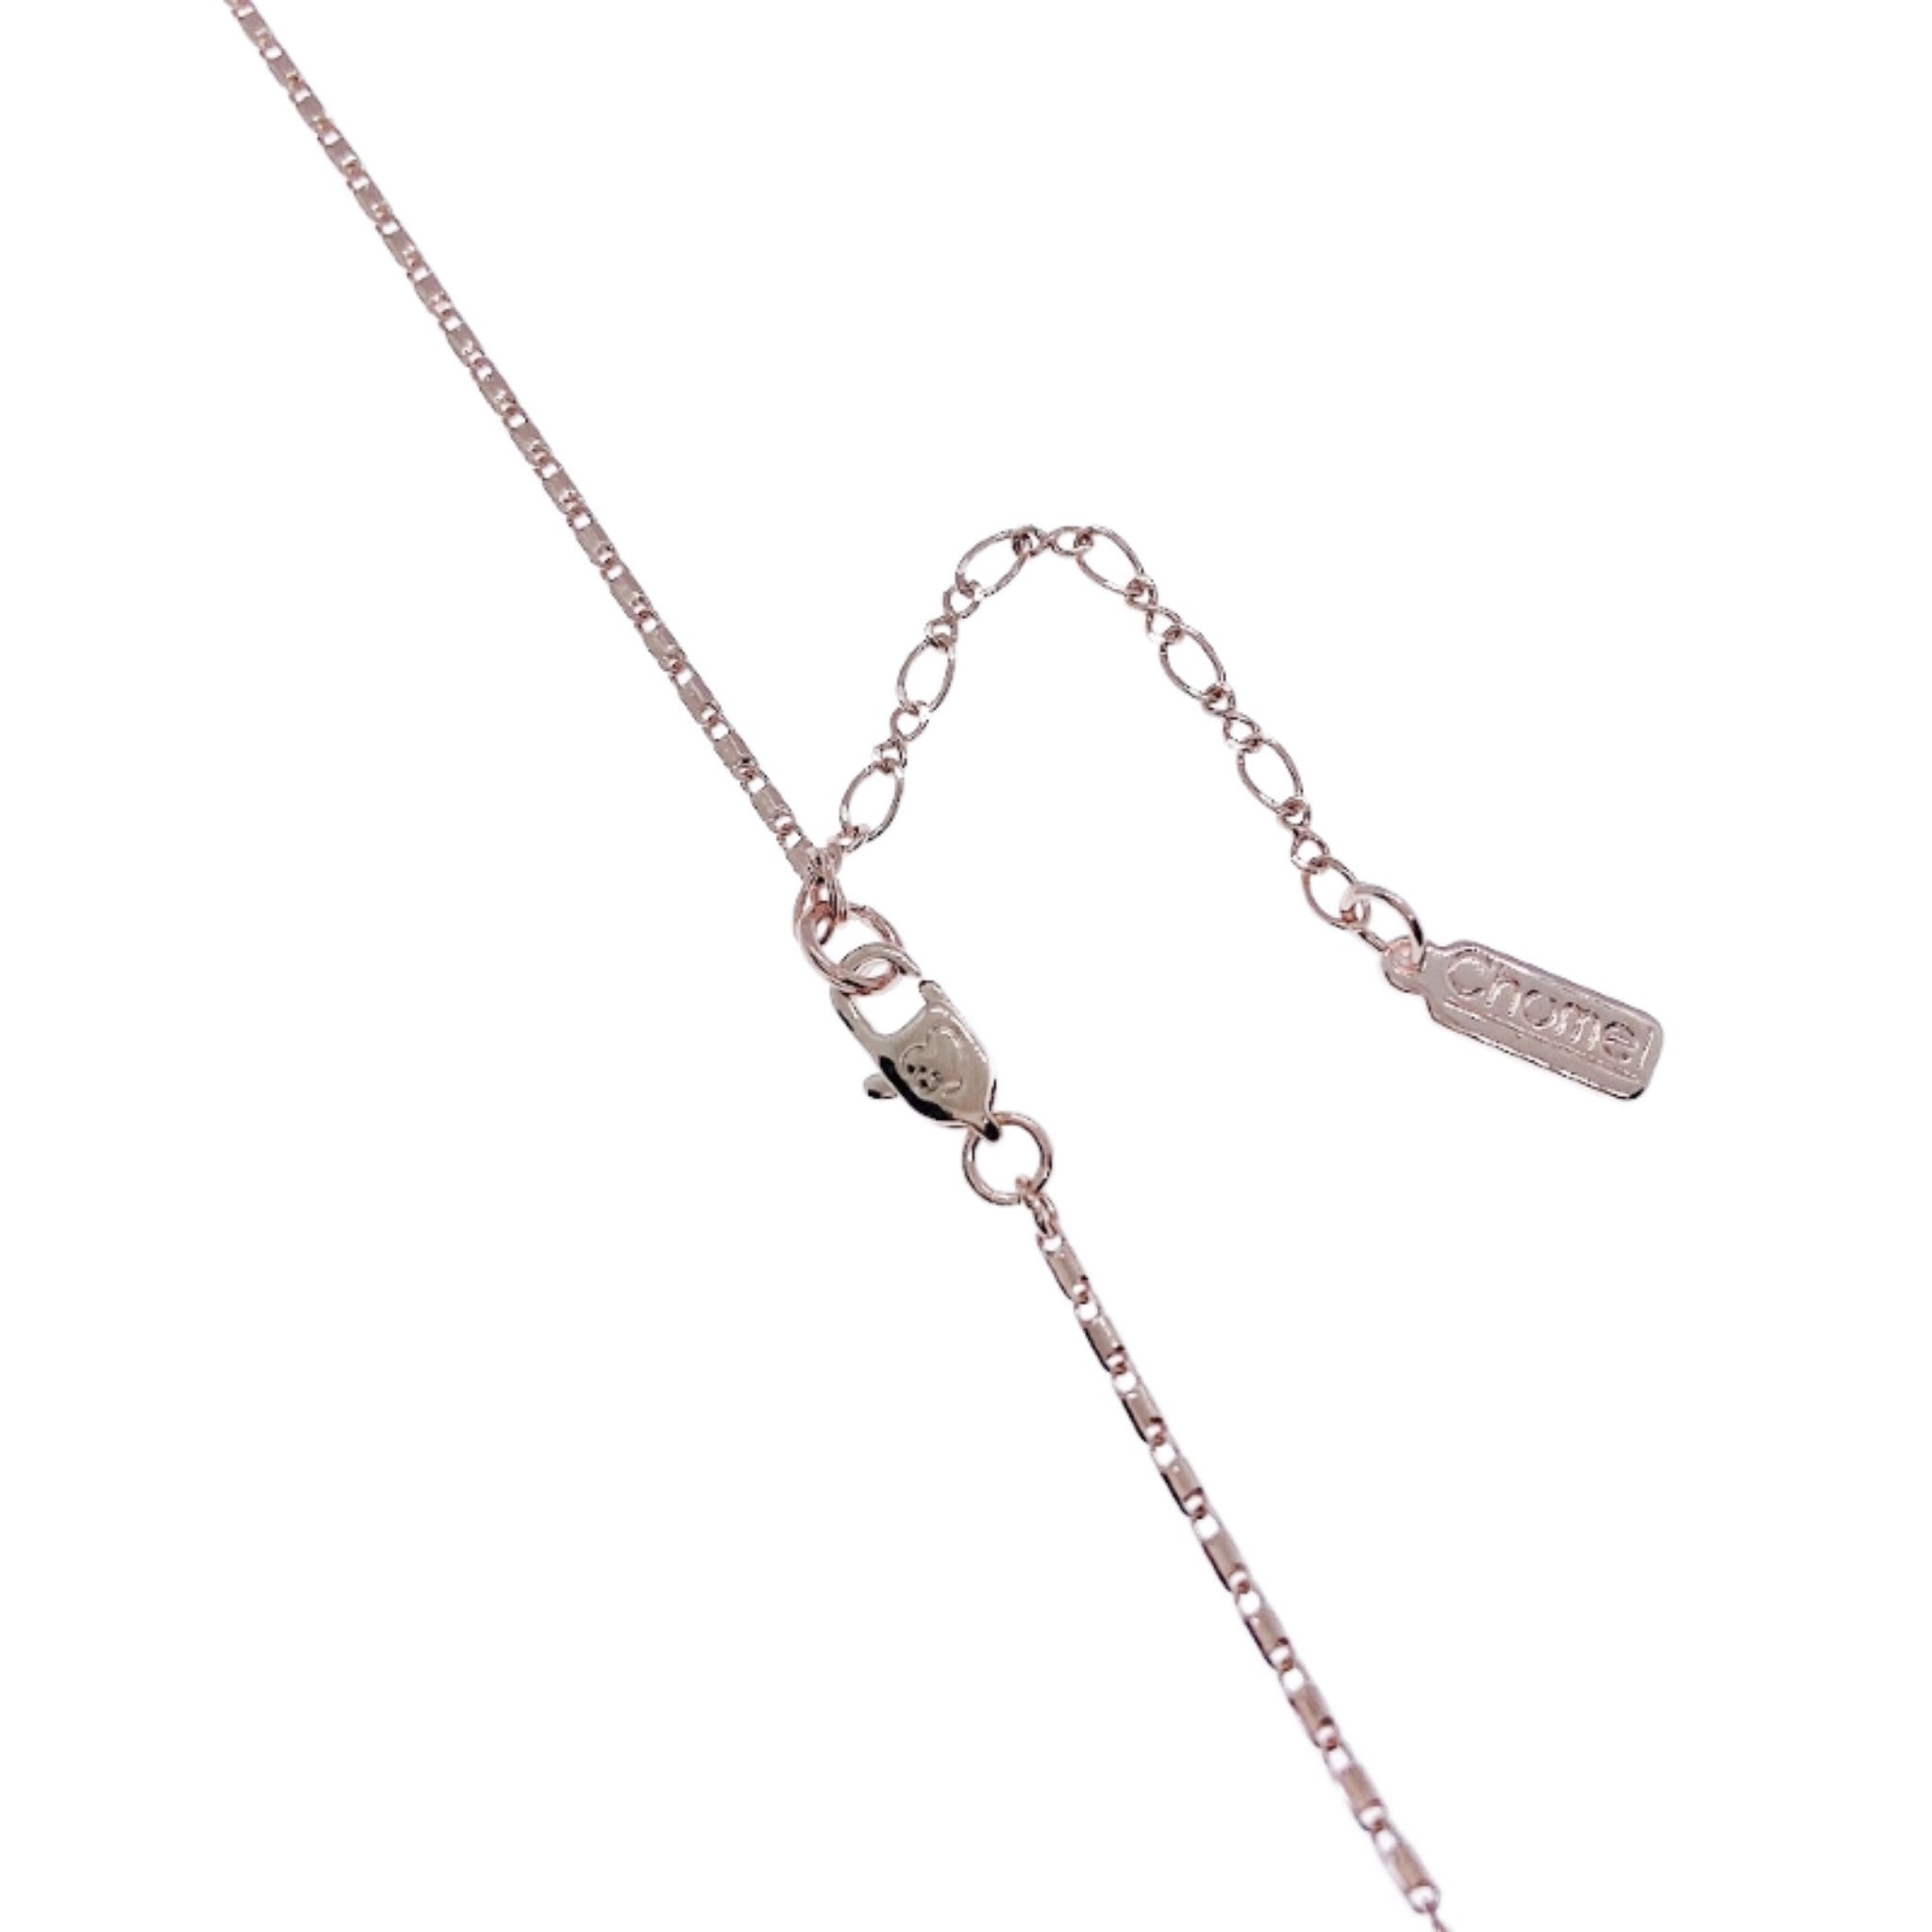 Simulated Moonstone Pendant Necklace.